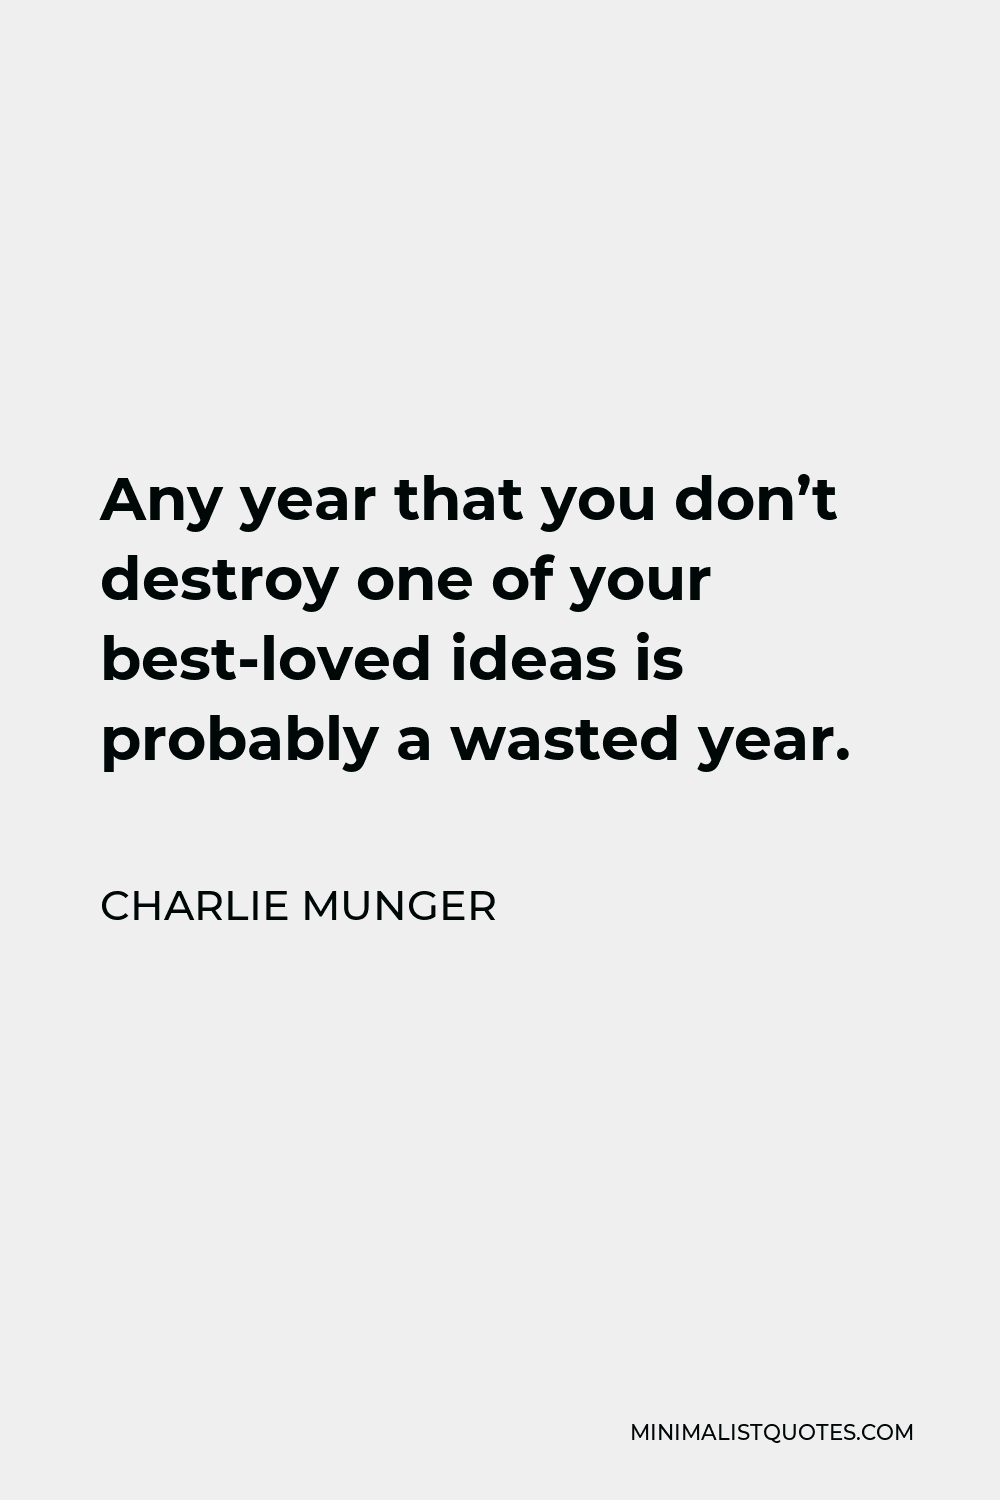 Charlie Munger Quote - Any year that you don’t destroy one of your best-loved ideas is probably a wasted year.